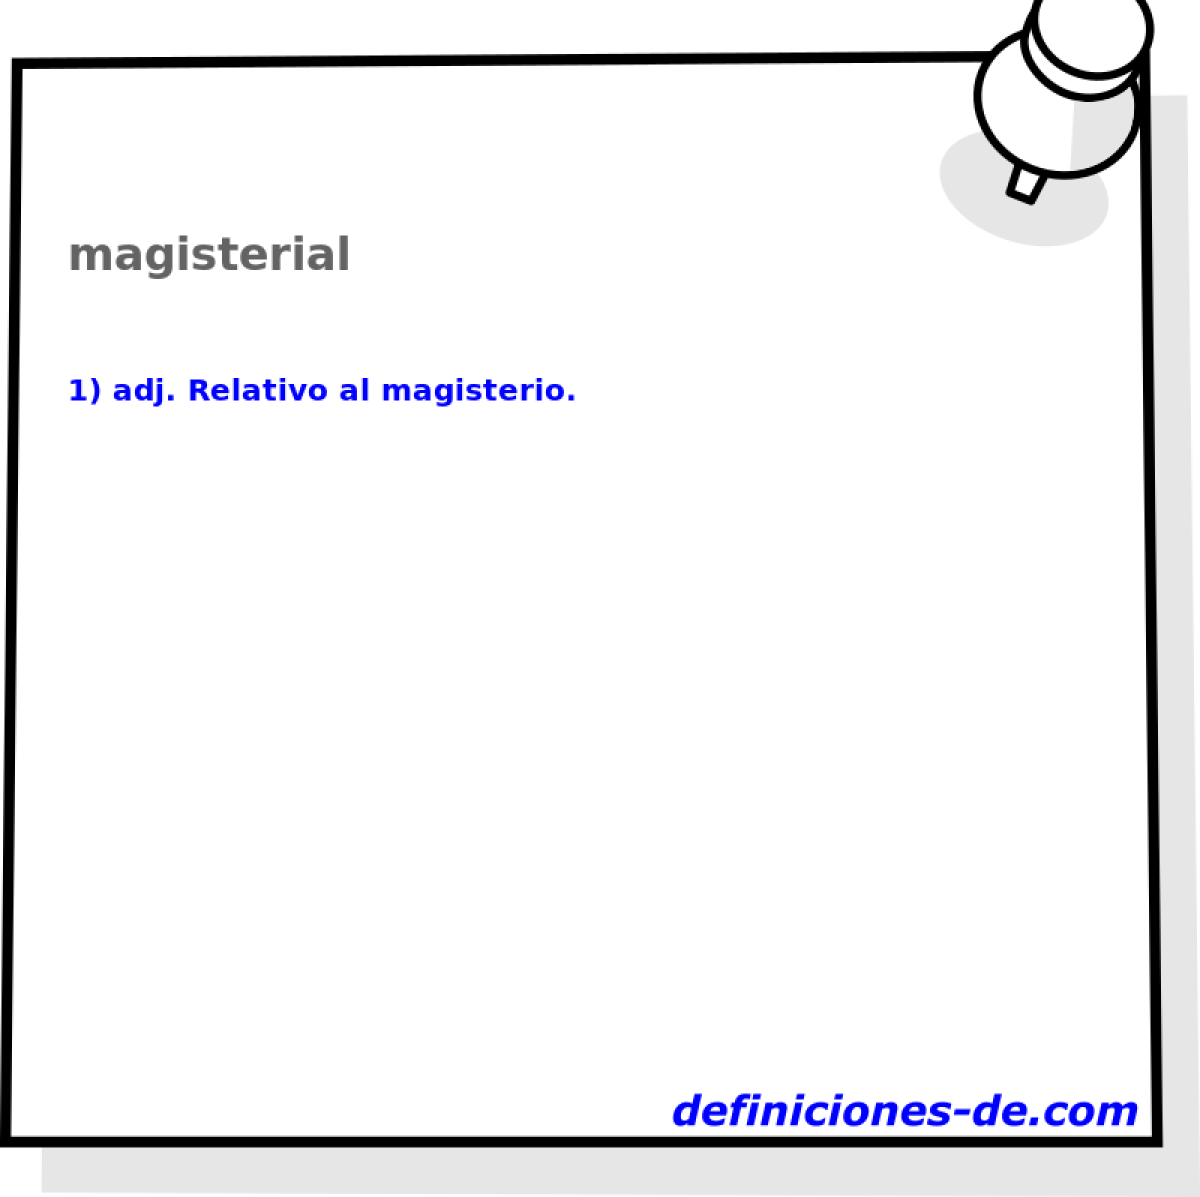 magisterial 